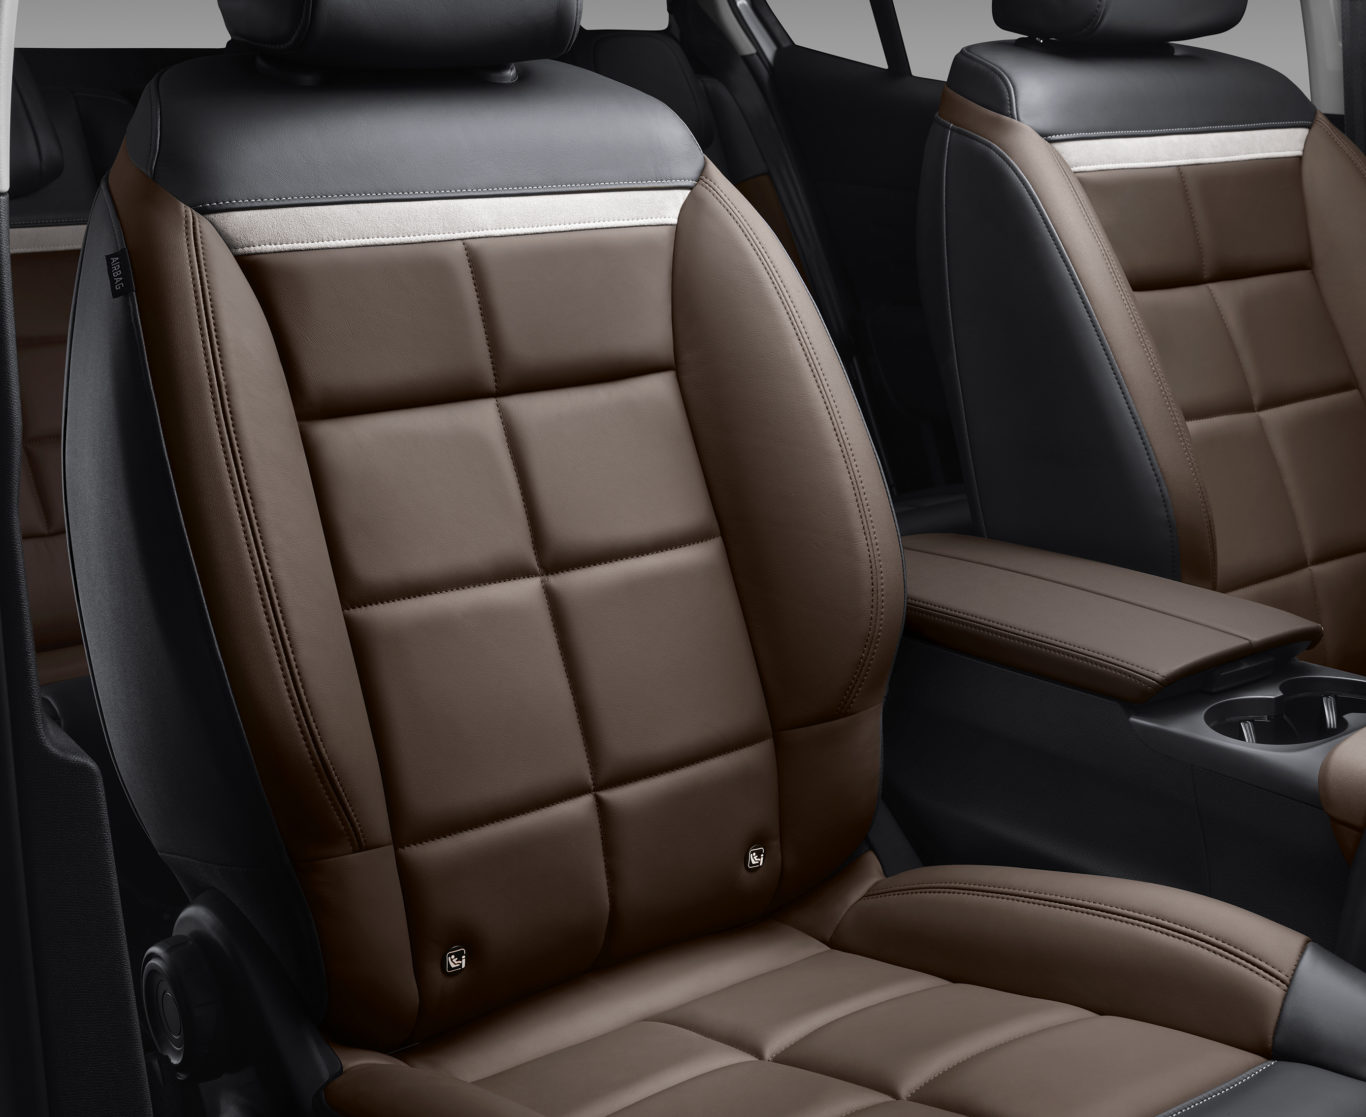 The Aircross' seats have been designed to be as comfortable as possible 